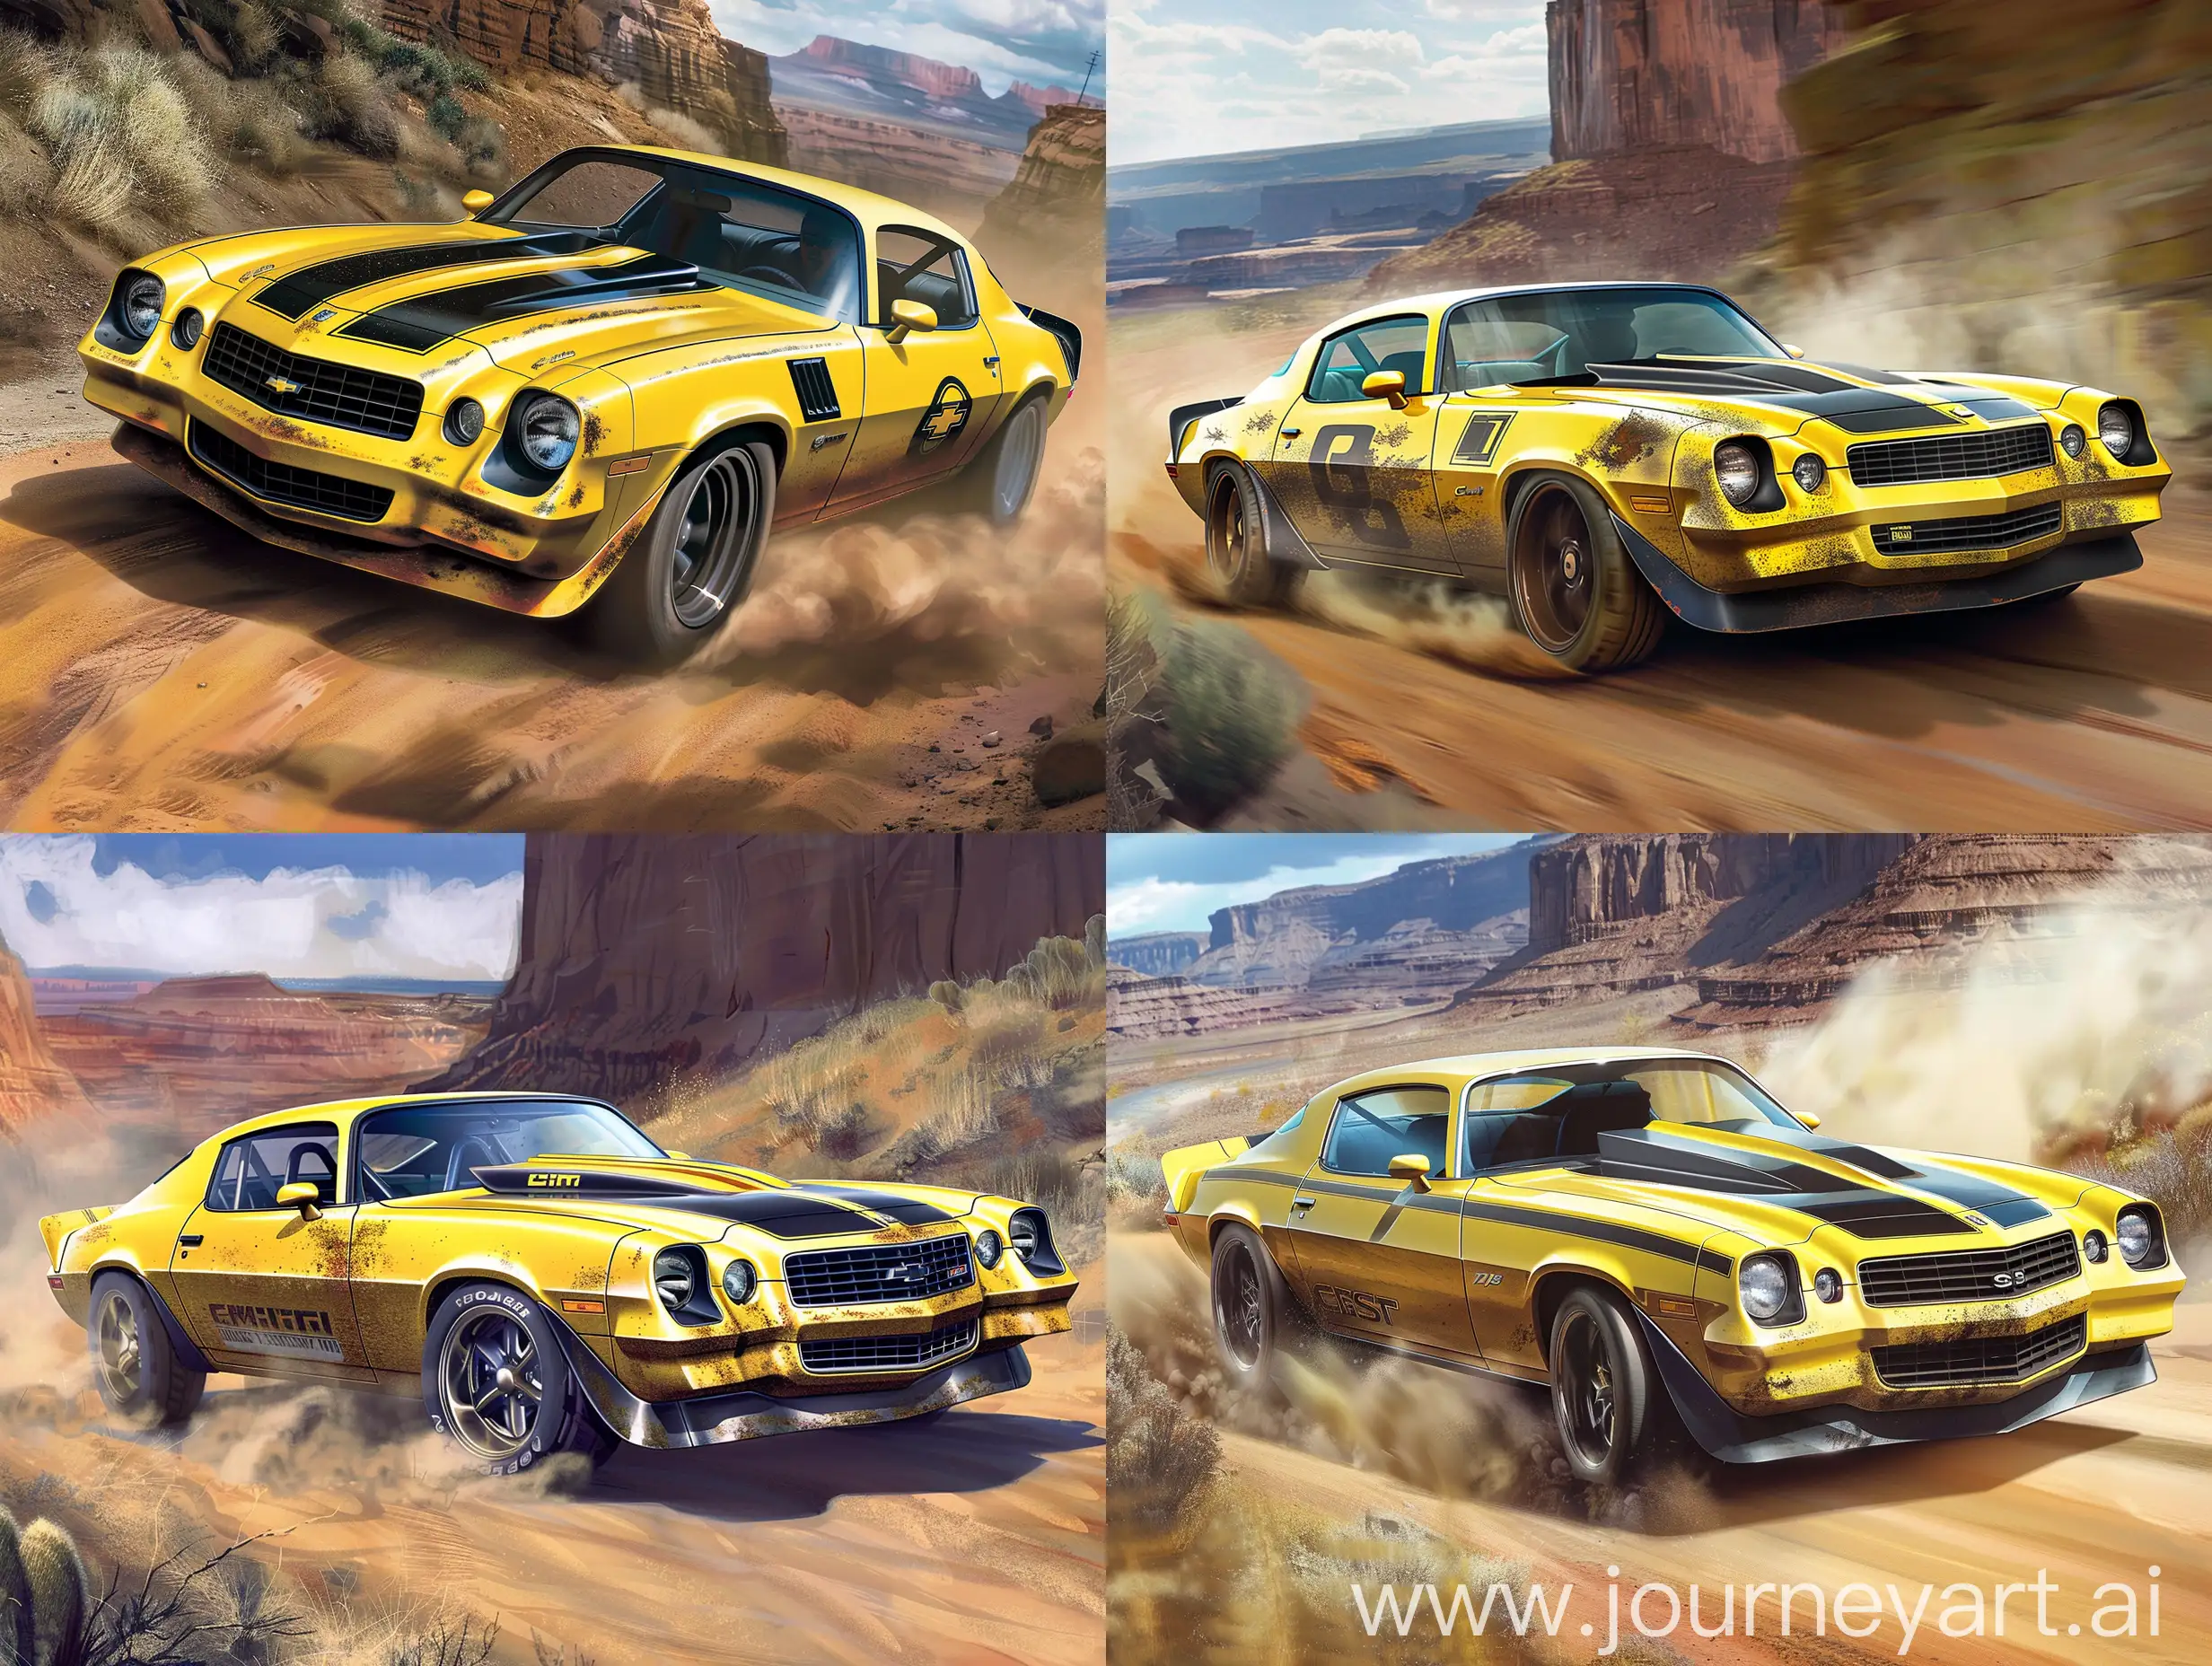 Vintage-Yellow-Chevrolet-Camaro-Racing-on-Dusty-Canyon-Road